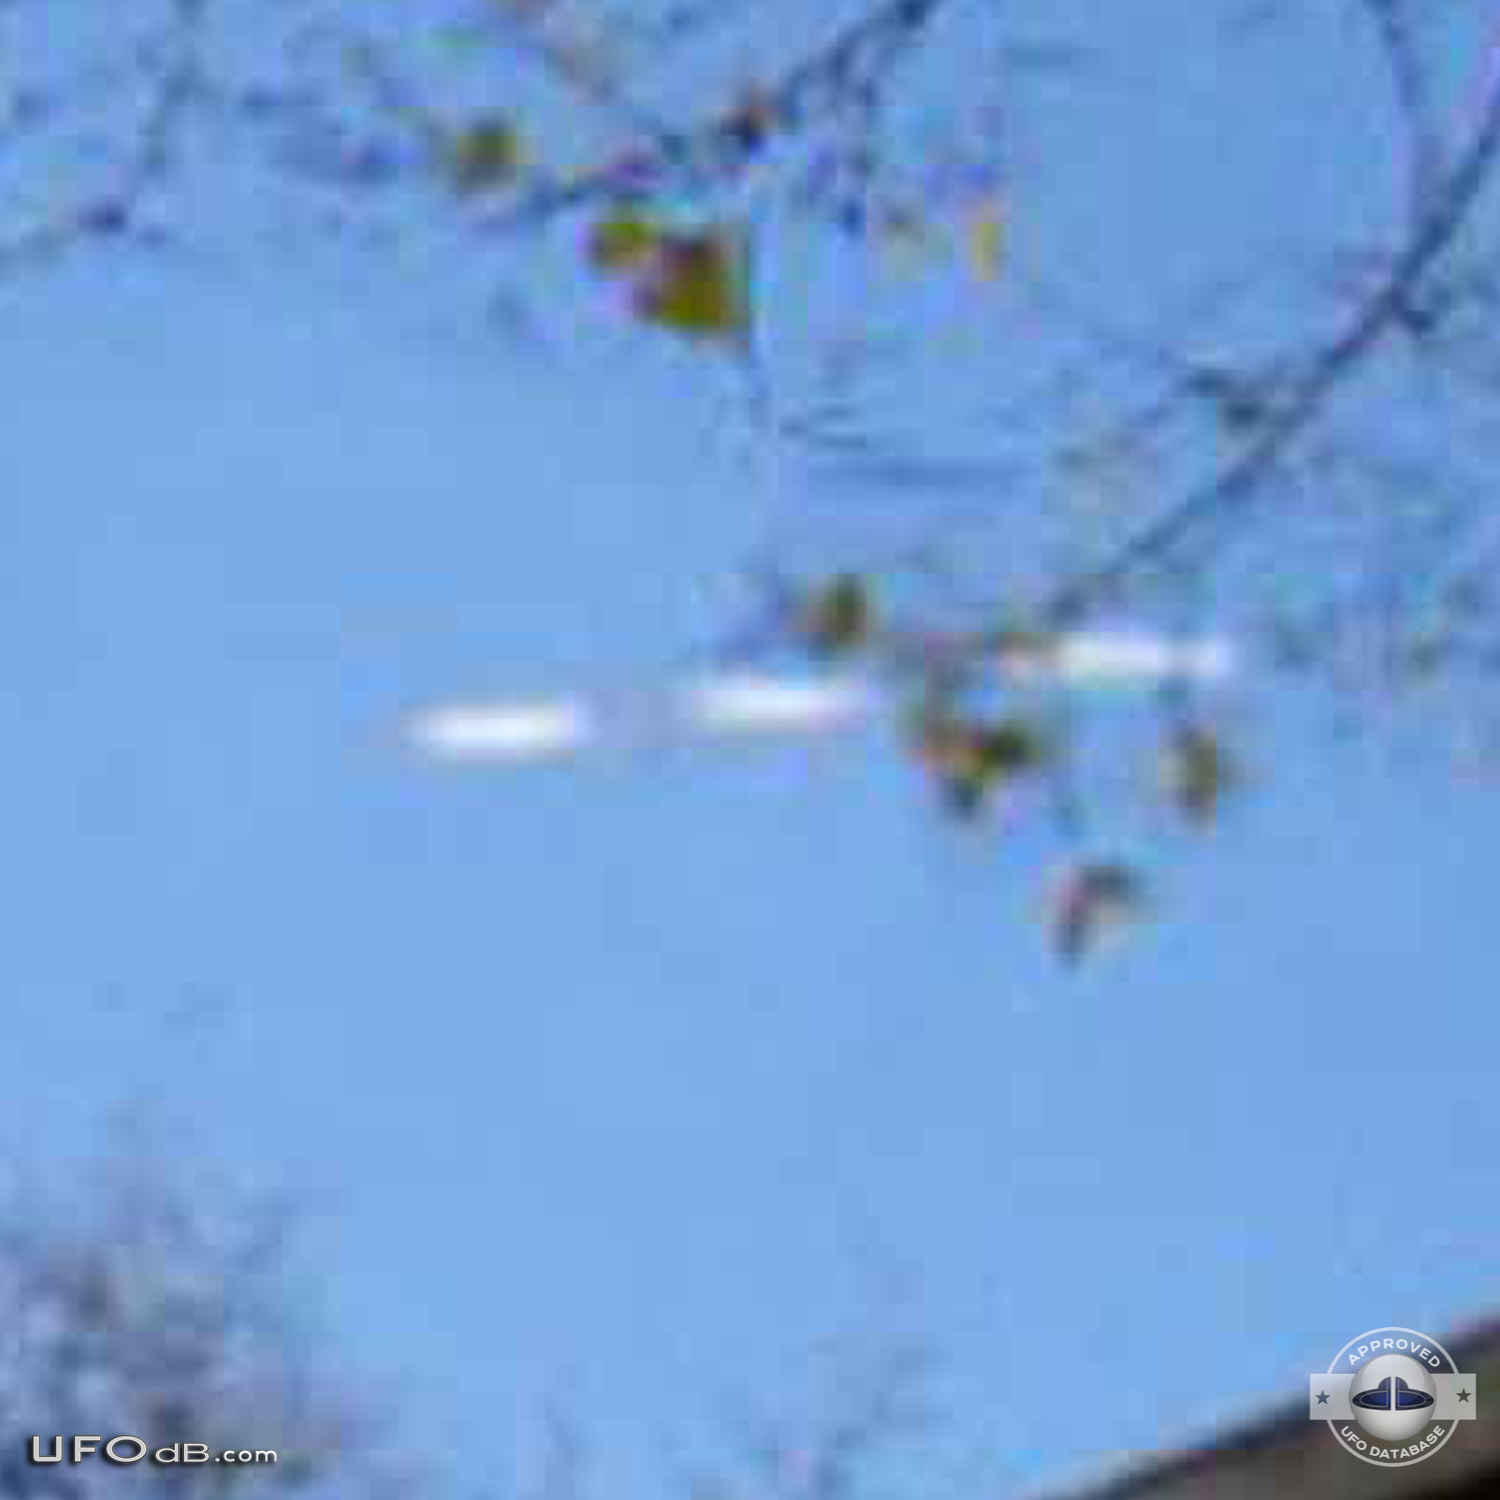 Fleet of 3 UFOs in formation caught on picture over Amsterdam in 2011 UFO Picture #378-5